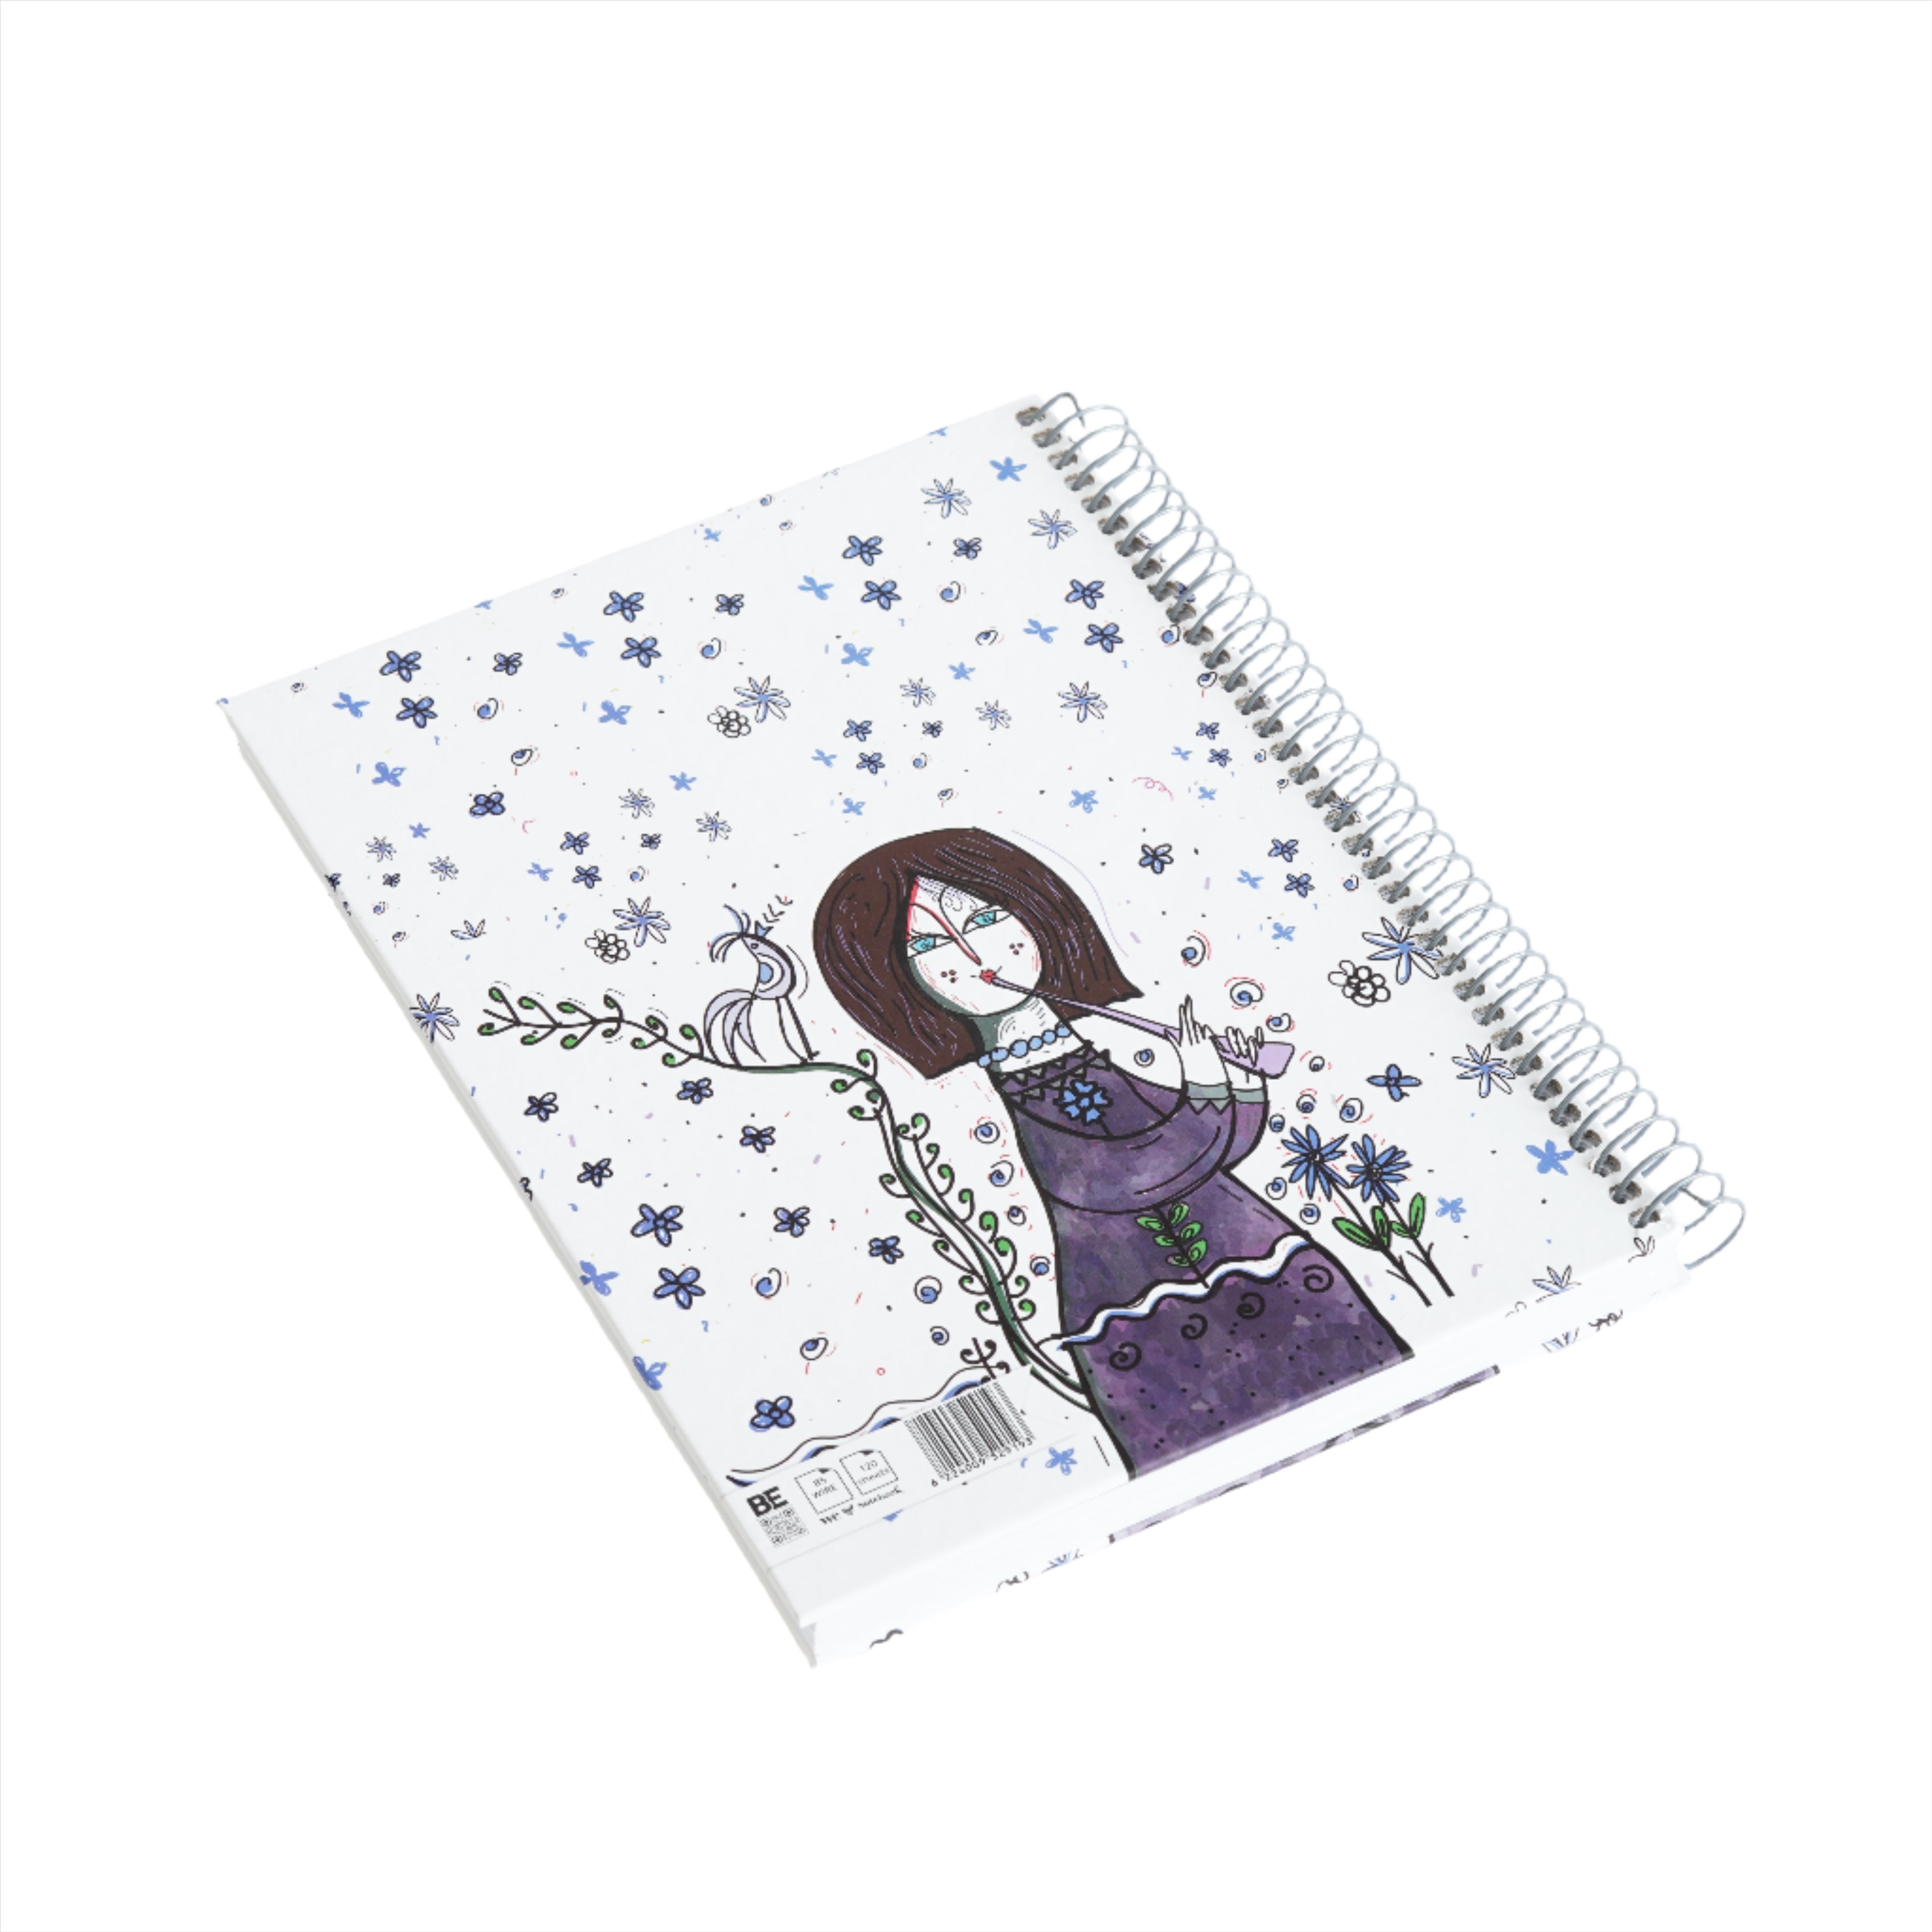 2BE Spiral Notebook B5 200 sheets - Be Fearless